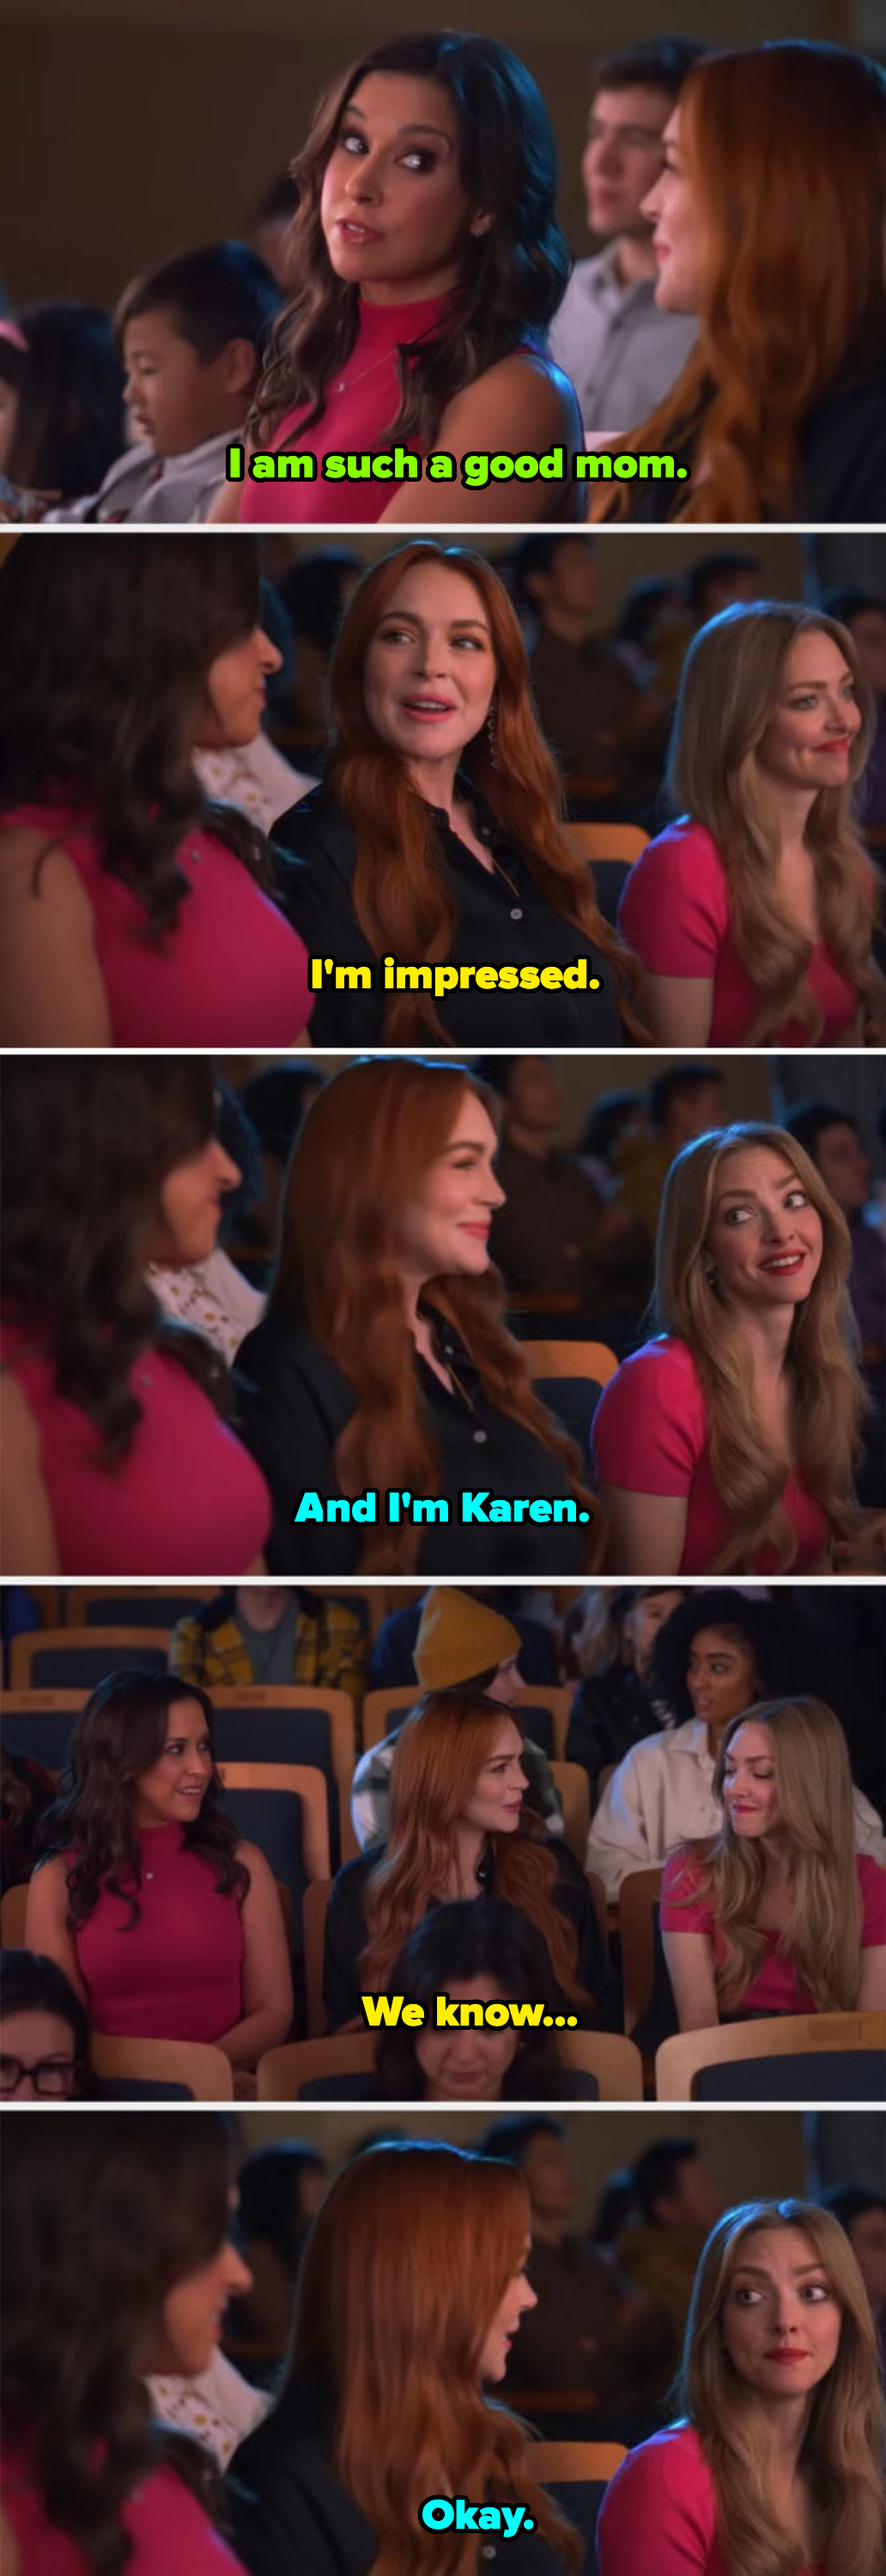 the girls talking in the audience